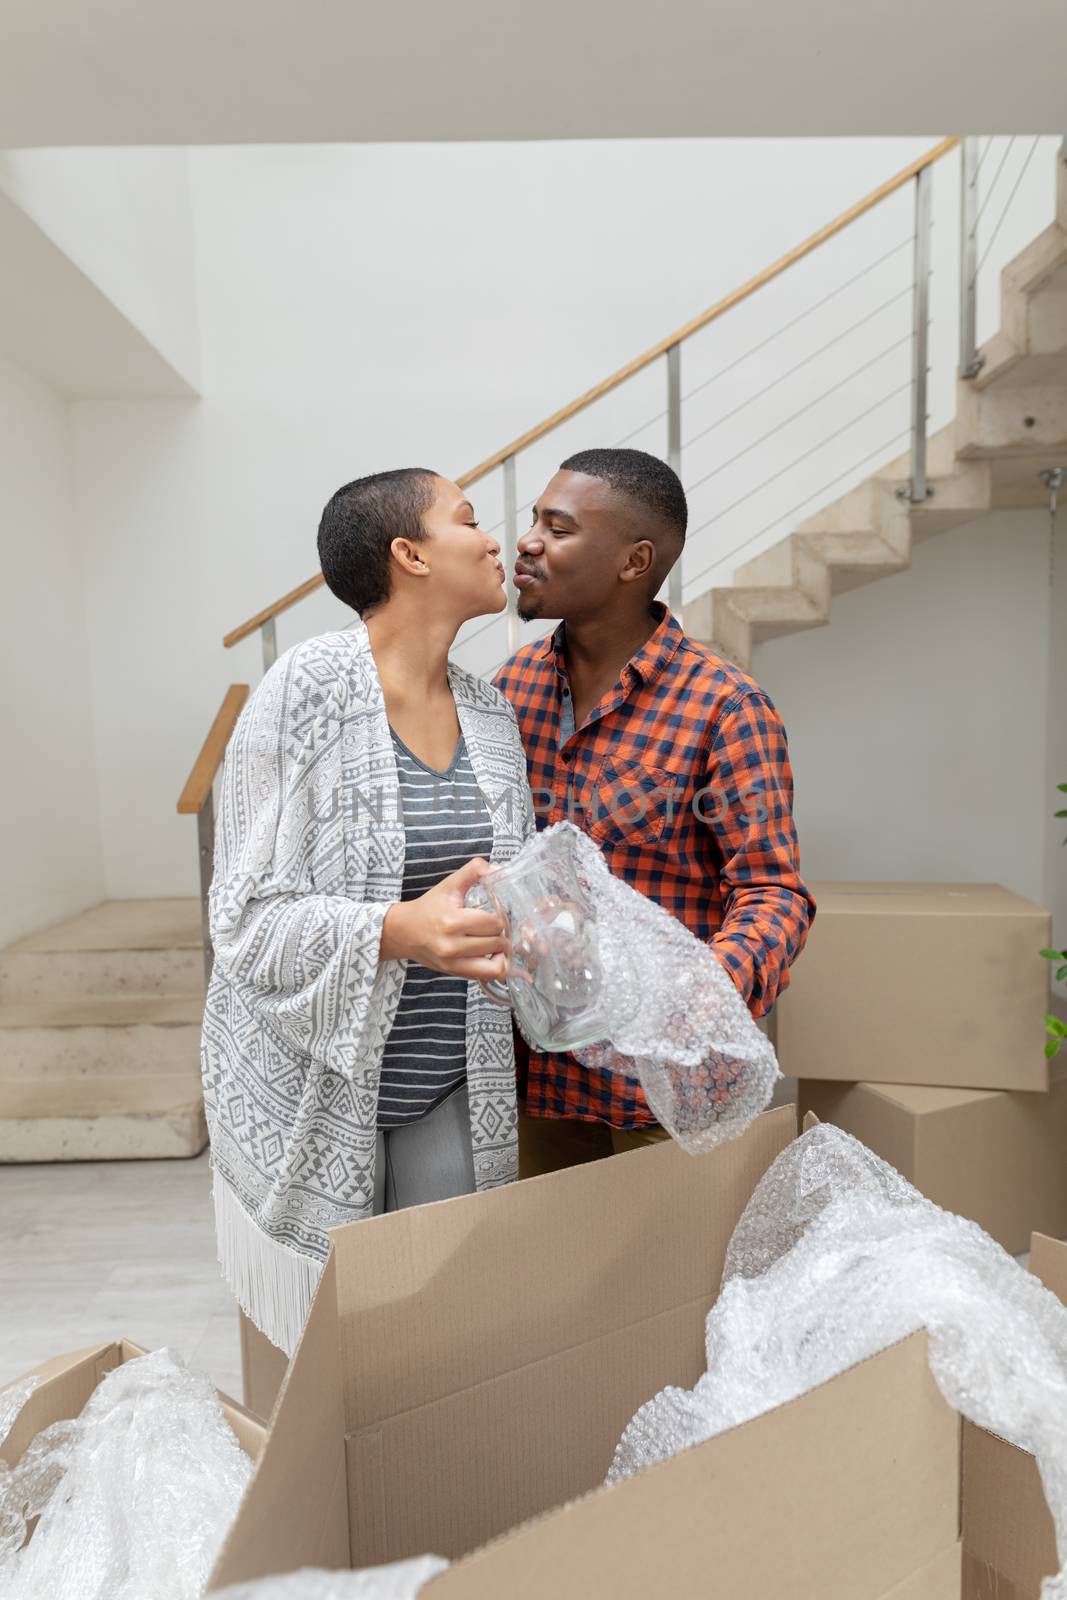 Couple kissing each other while unpacking cardboard boxes in living room by Wavebreakmedia